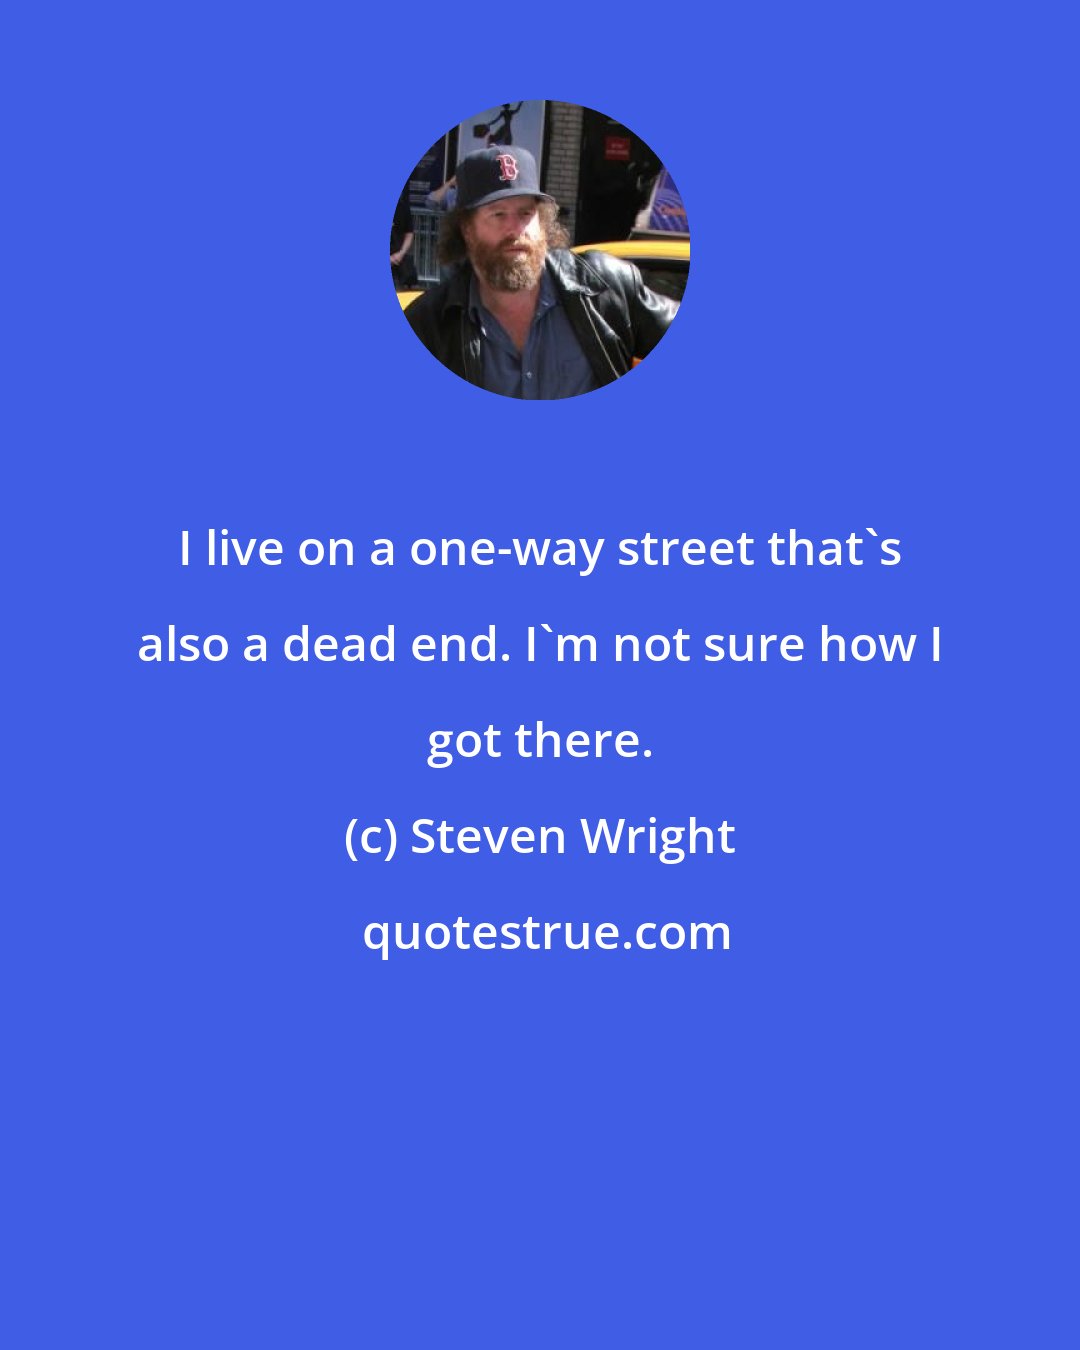 Steven Wright: I live on a one-way street that's also a dead end. I'm not sure how I got there.